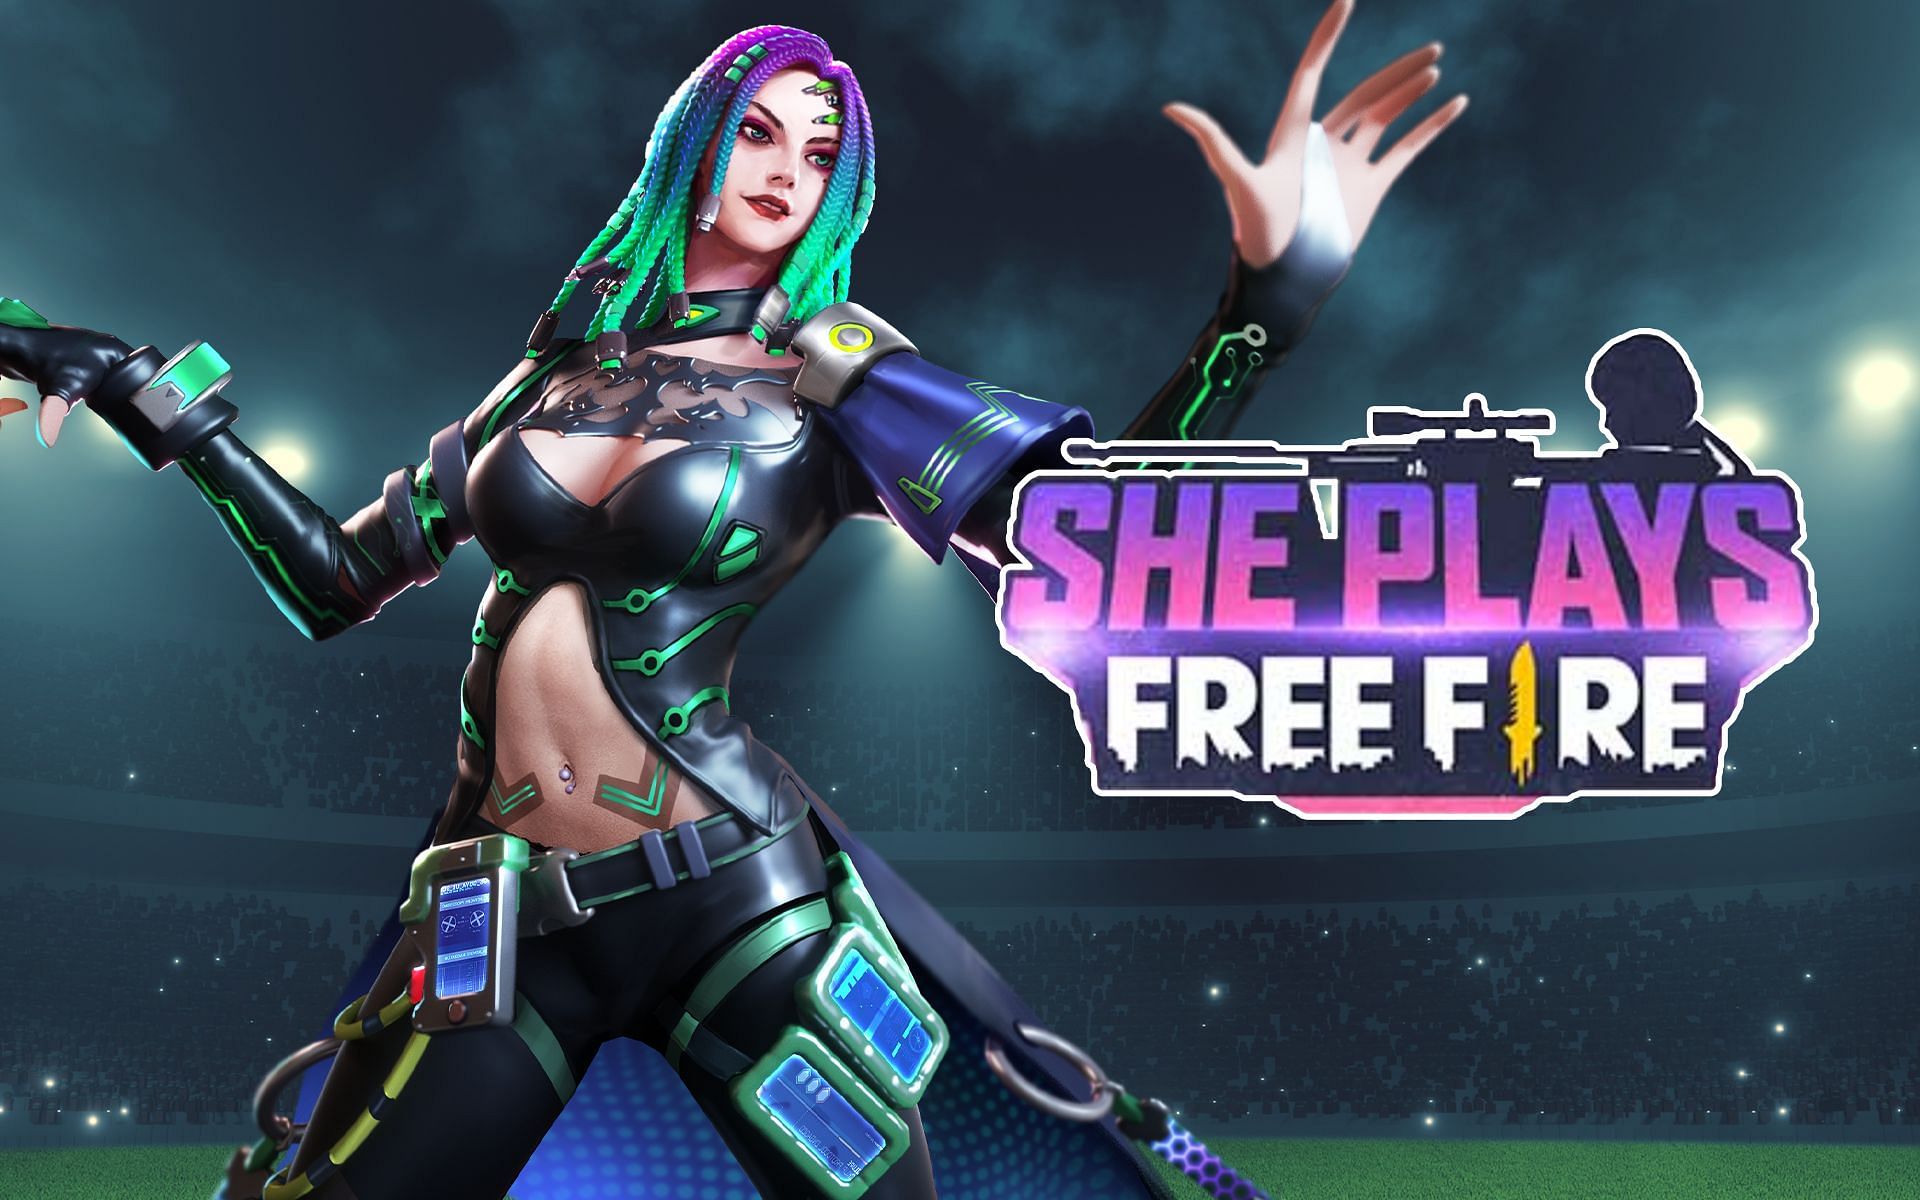 She Plays Free Fire events will offer numerous female-themed rewards (Image via Sportskeeda)